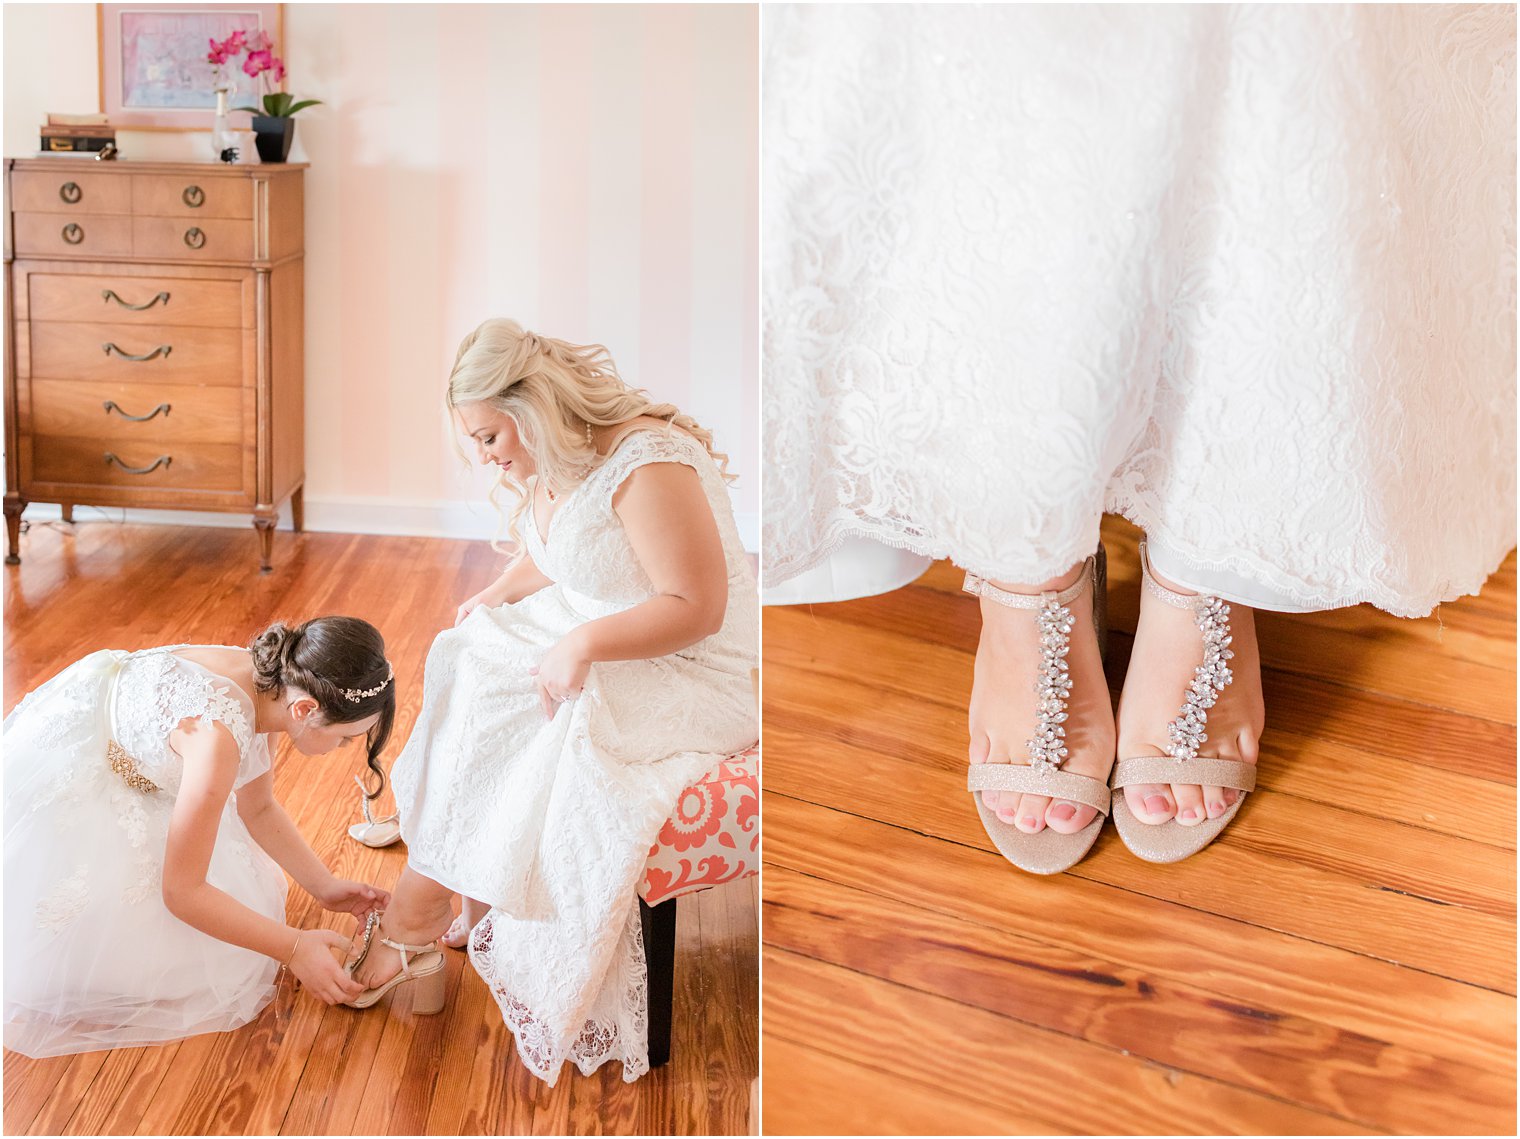 flower girl helps bride with shoes on New Jersey wedding day